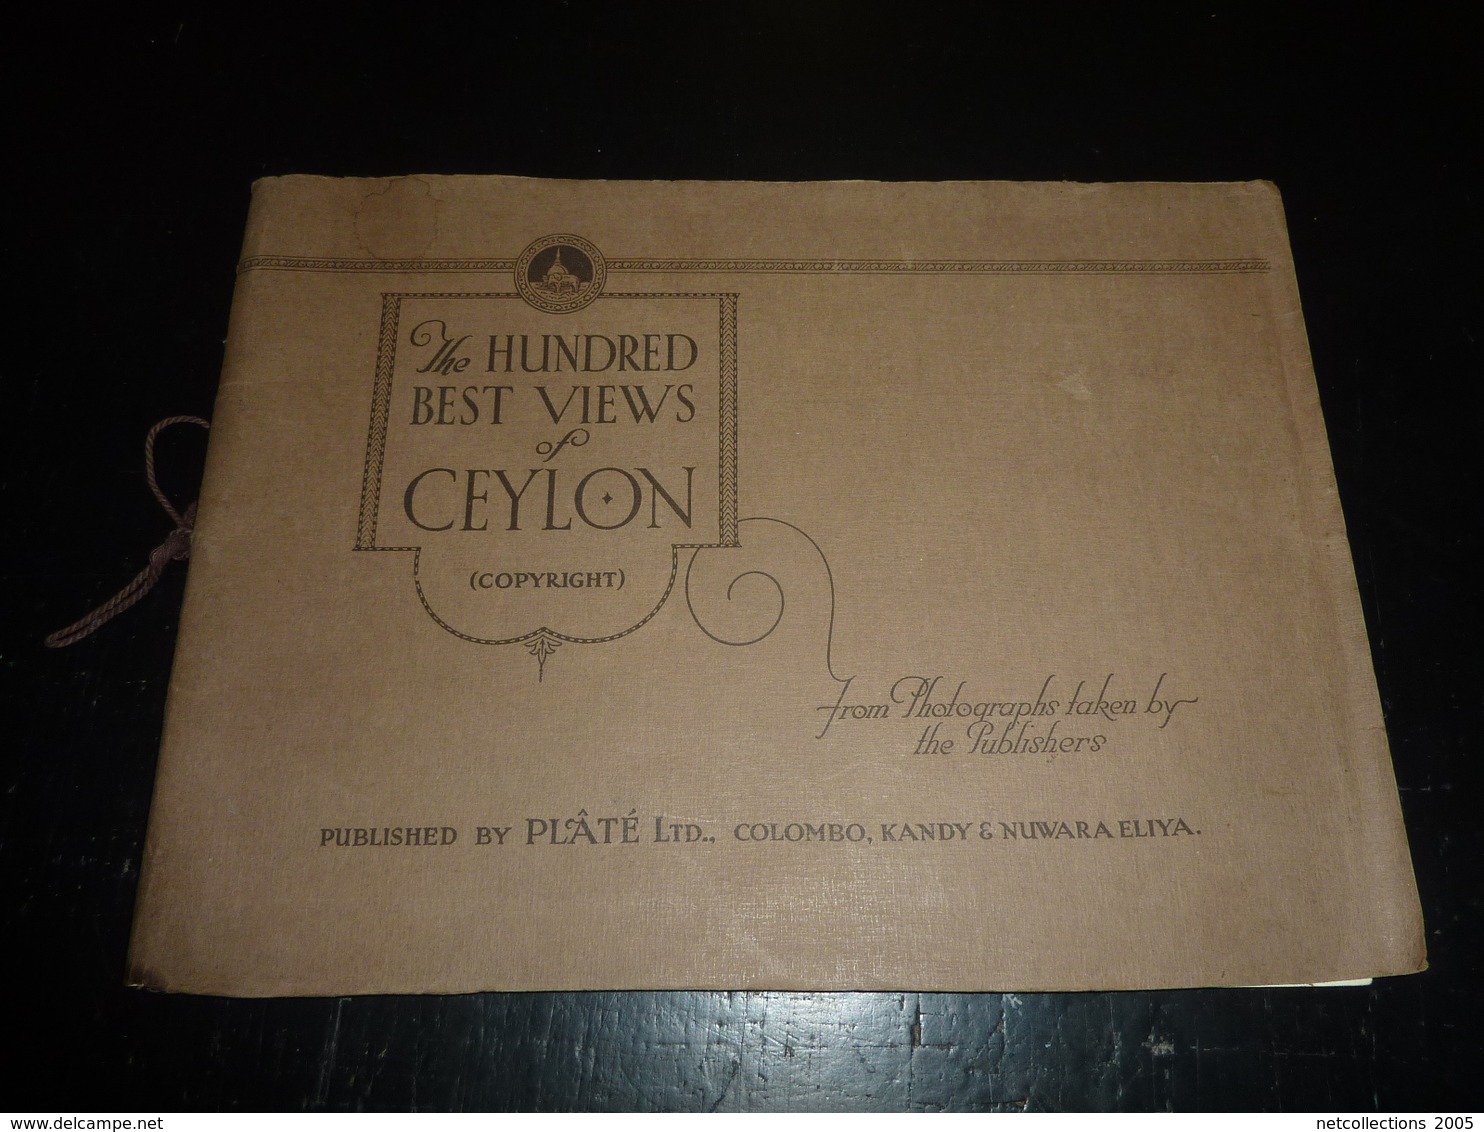 THE HUNDRED BEST VIEWS OF CEYLON - FROM PHOTOGRAPHS TAKEN BY THE PUBLISHERS - 100 MEILLEURS VUES DE CEYLON (AD) - Orte